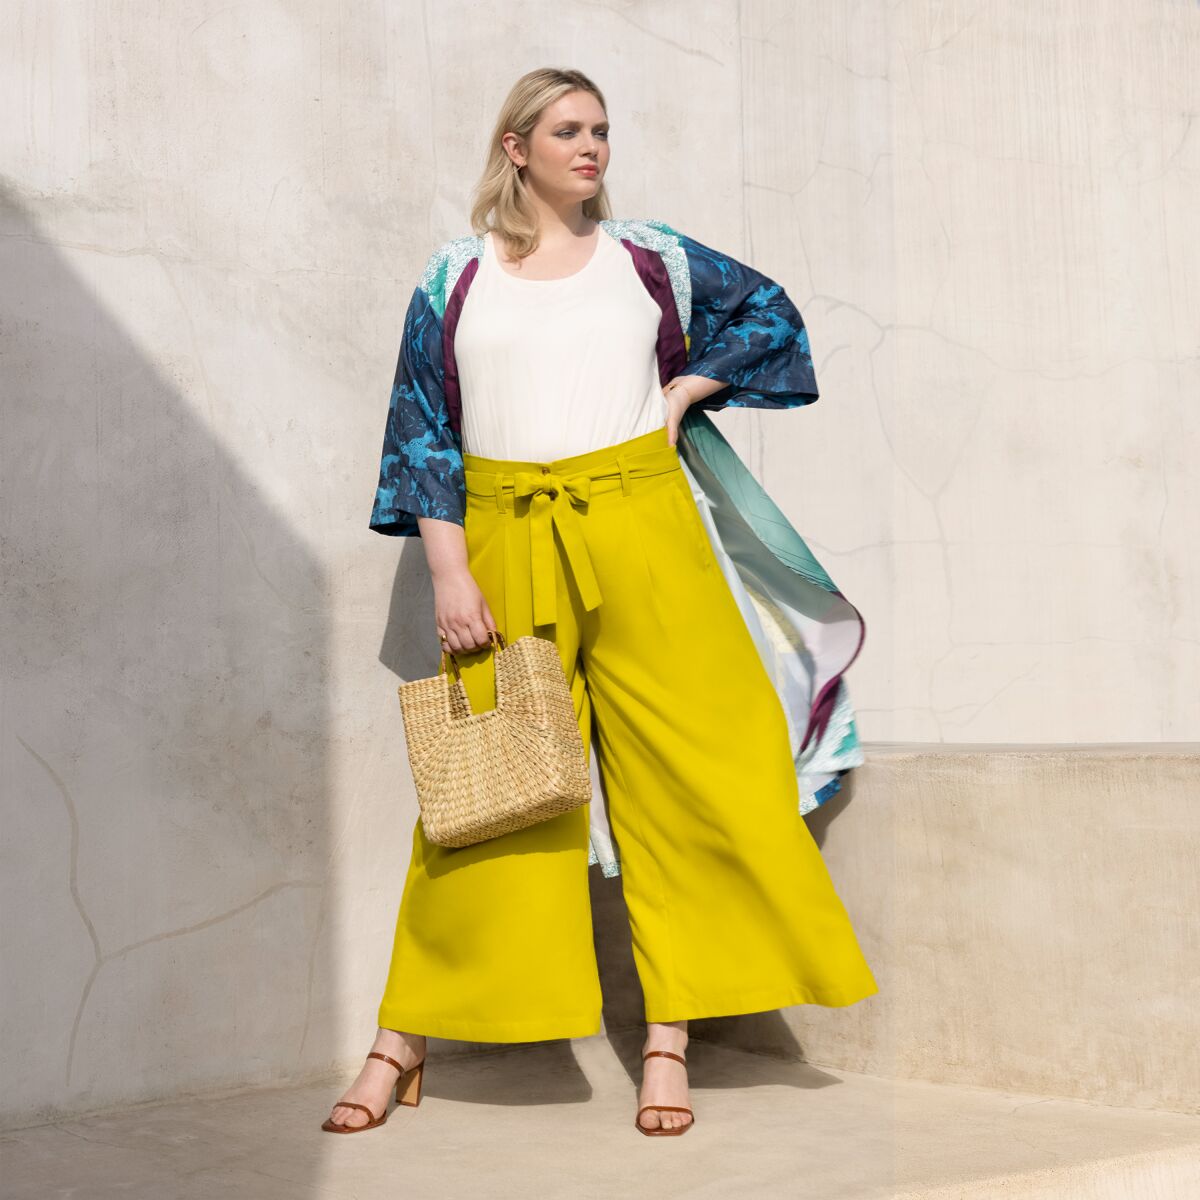 A woman modeling wide-leg yellow pants and a beach-inspired wrap